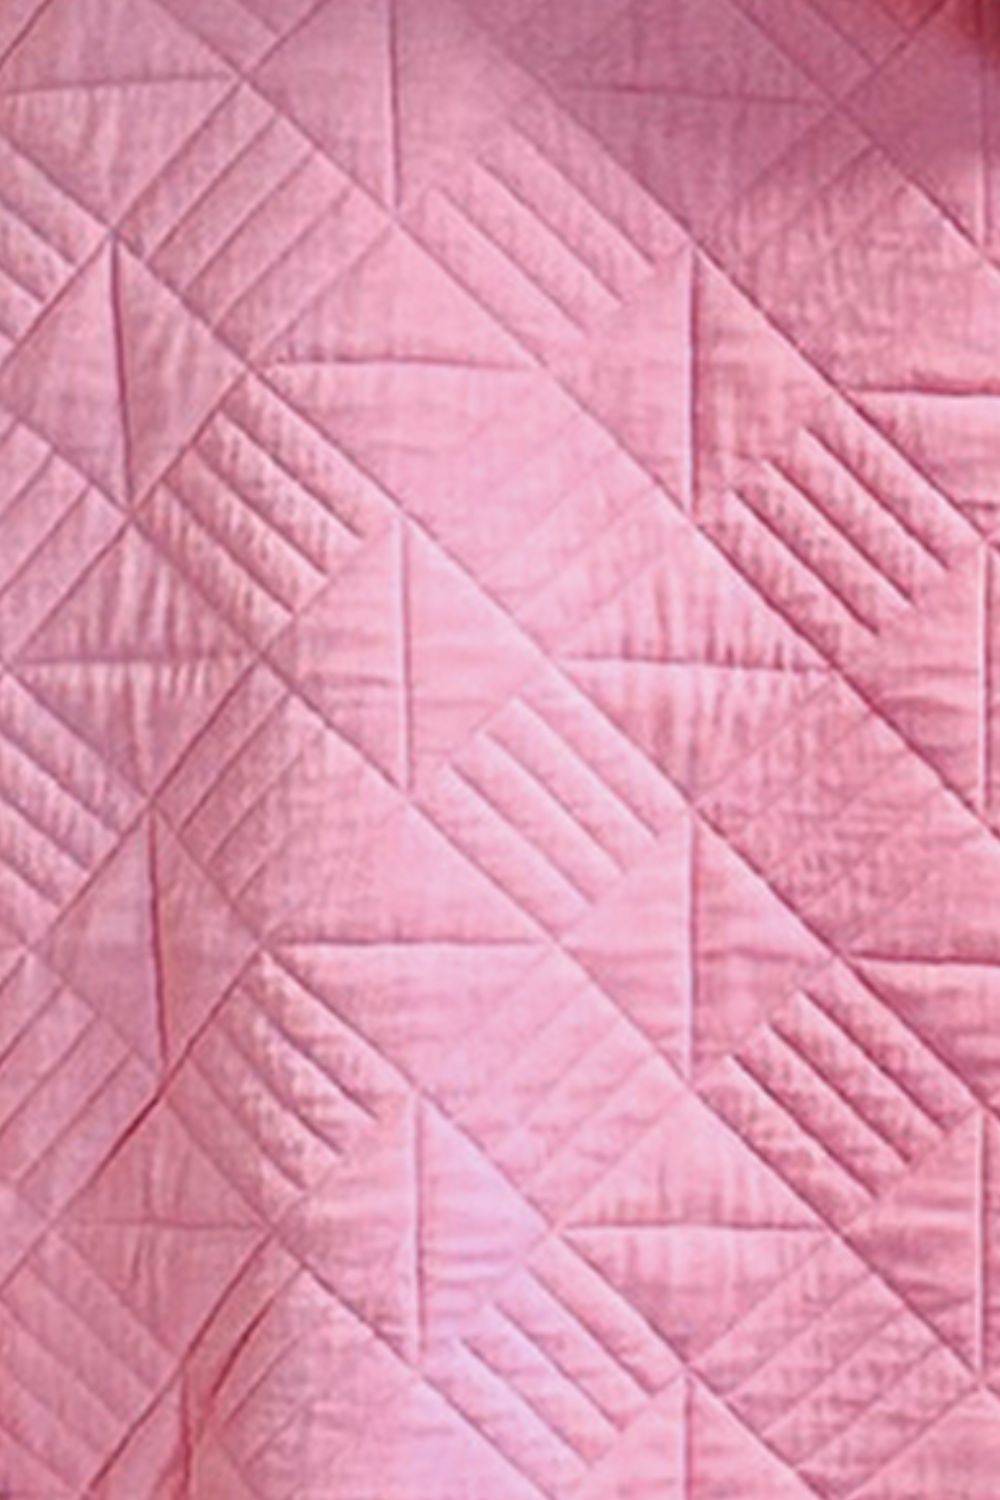 a close up of a pink quilt on a bed